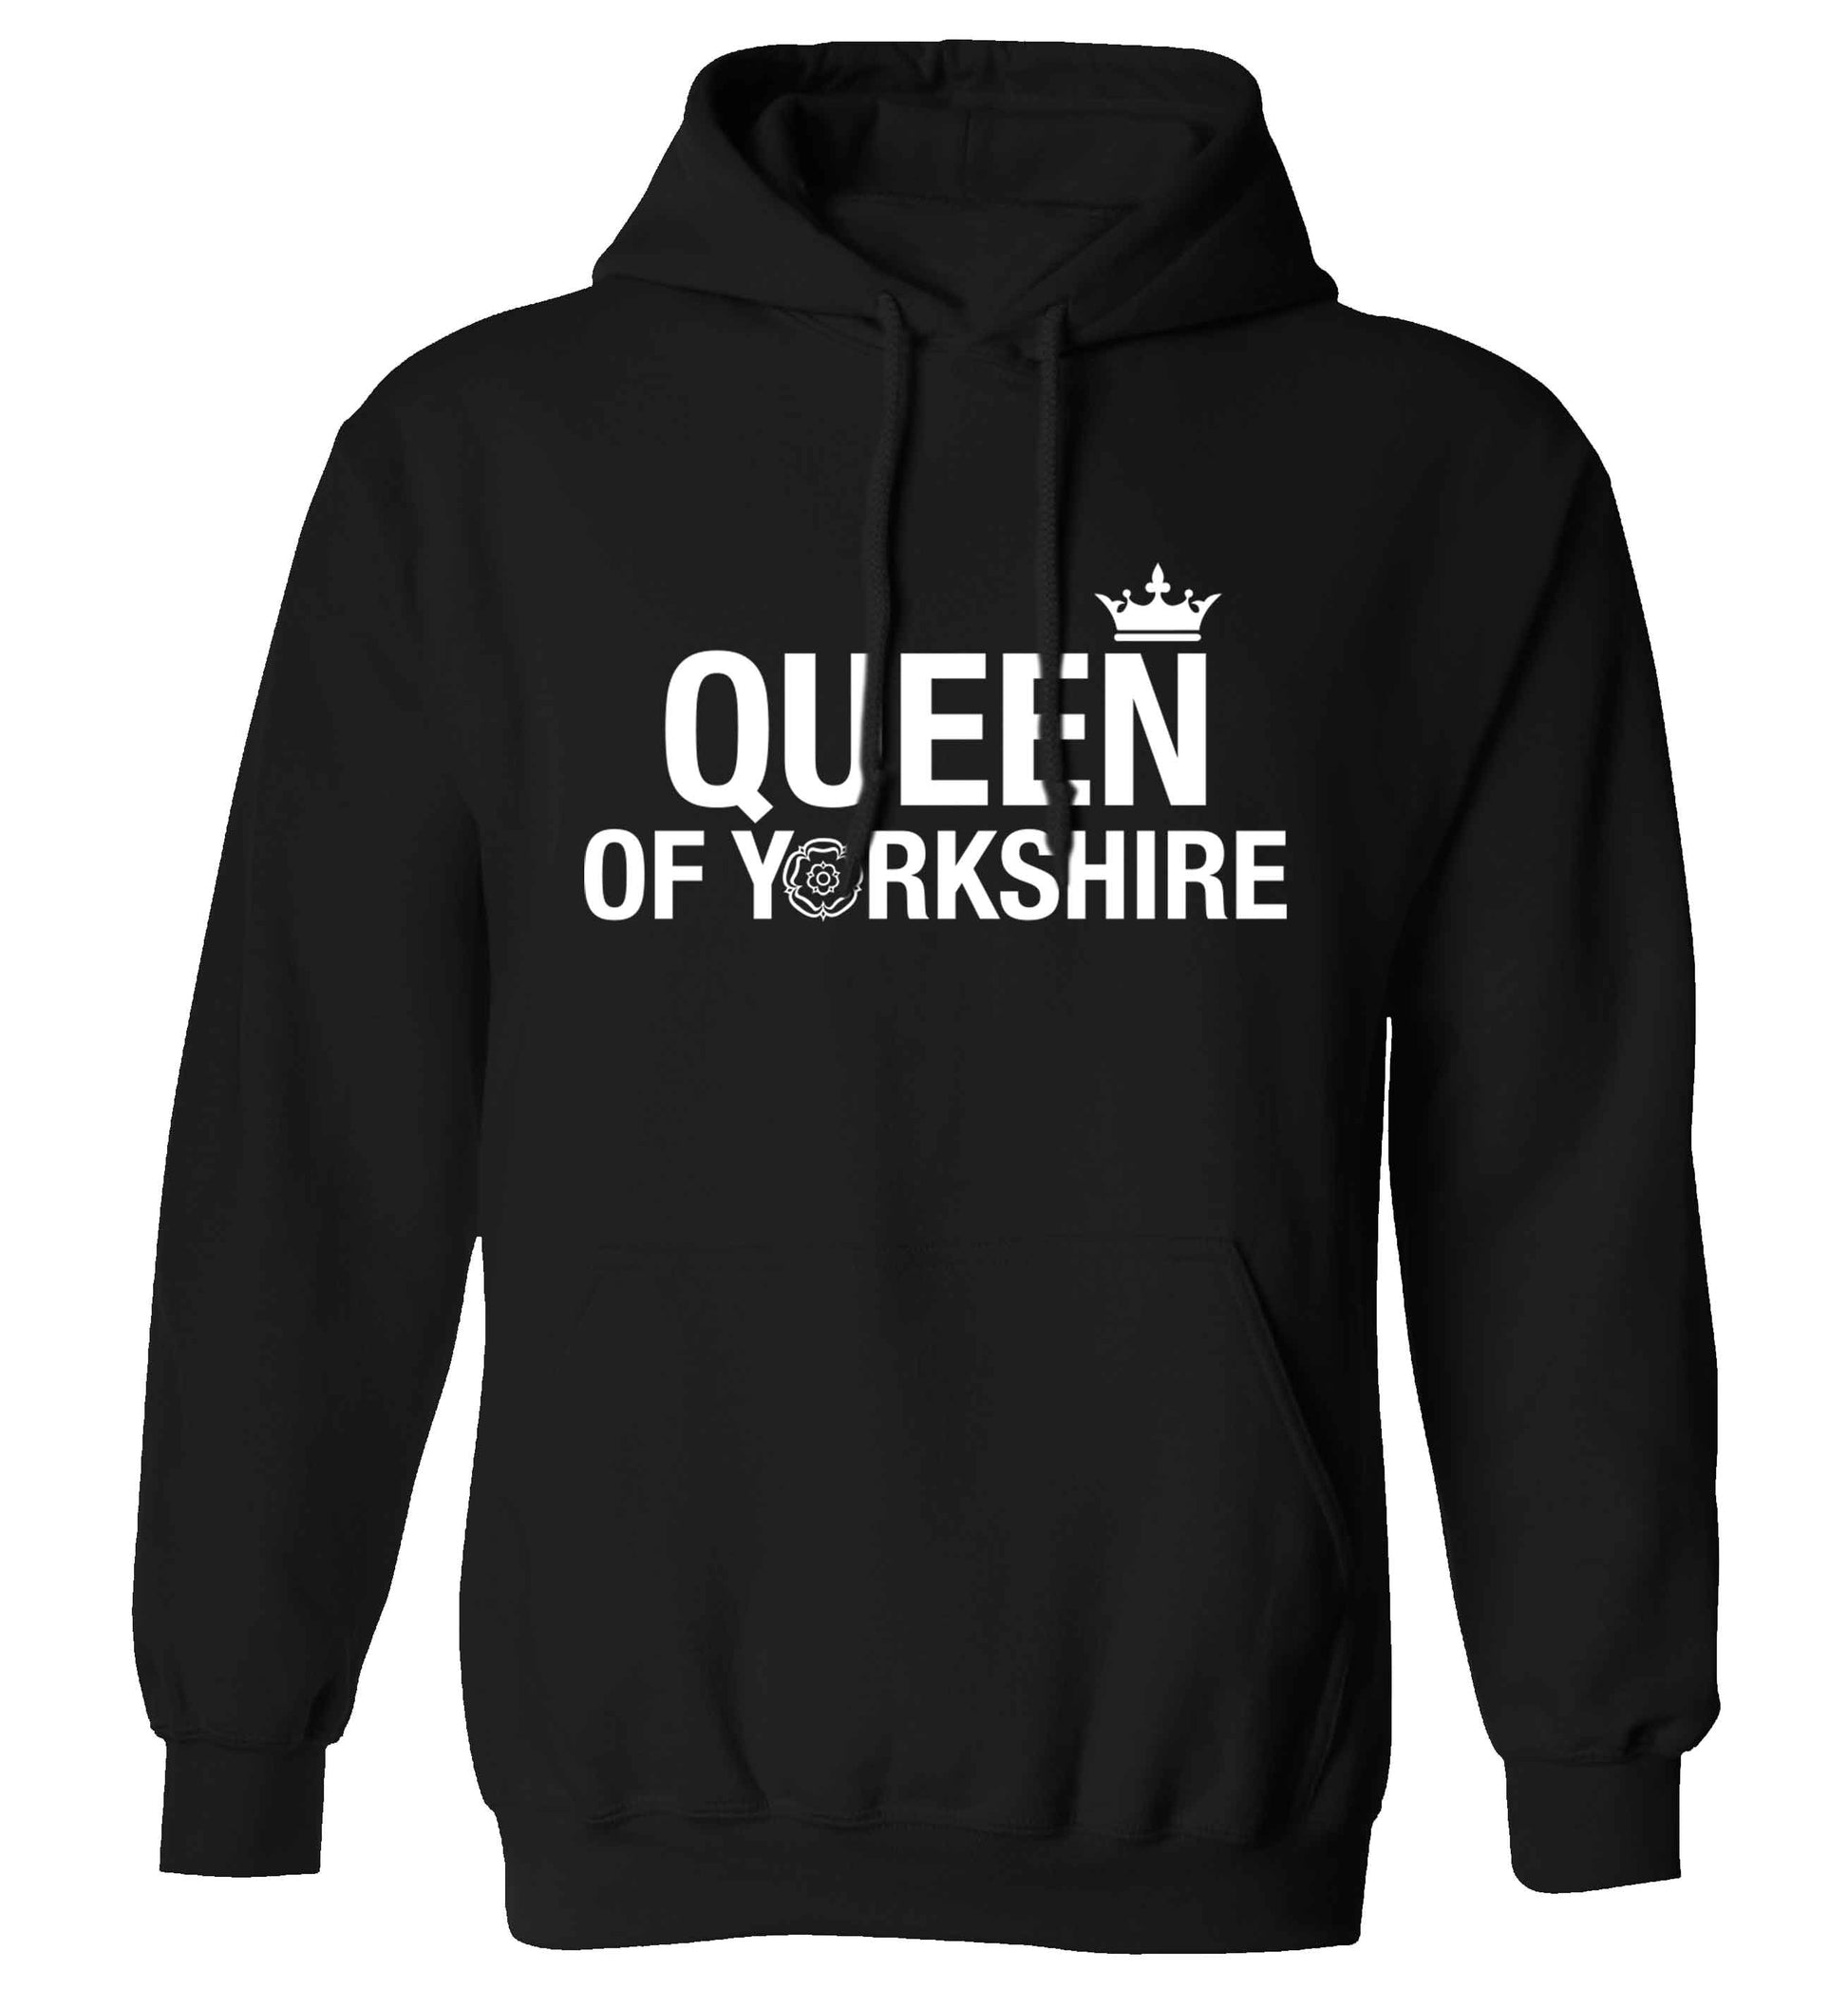 Queen of Yorkshire adults unisex black hoodie 2XL